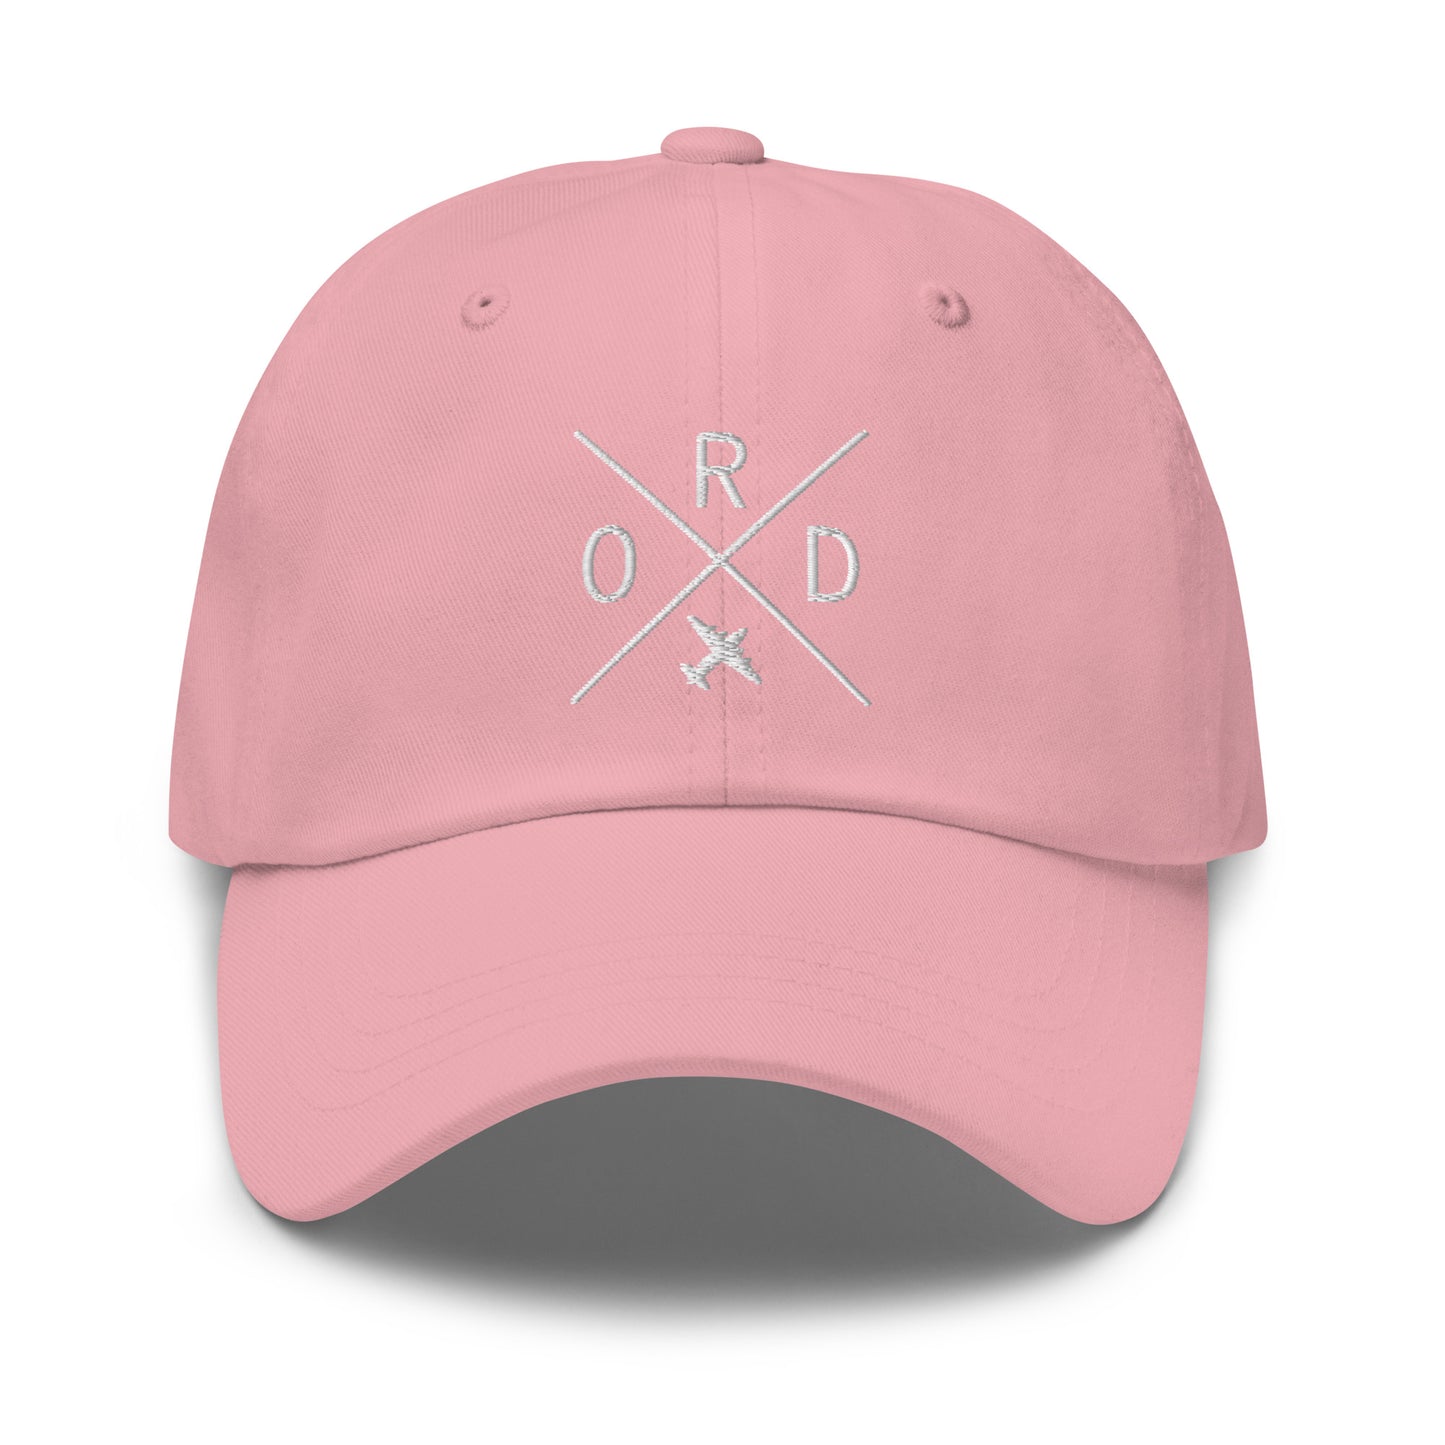 Crossed-X Dad Hat - White • ORD Chicago • YHM Designs - Image 25